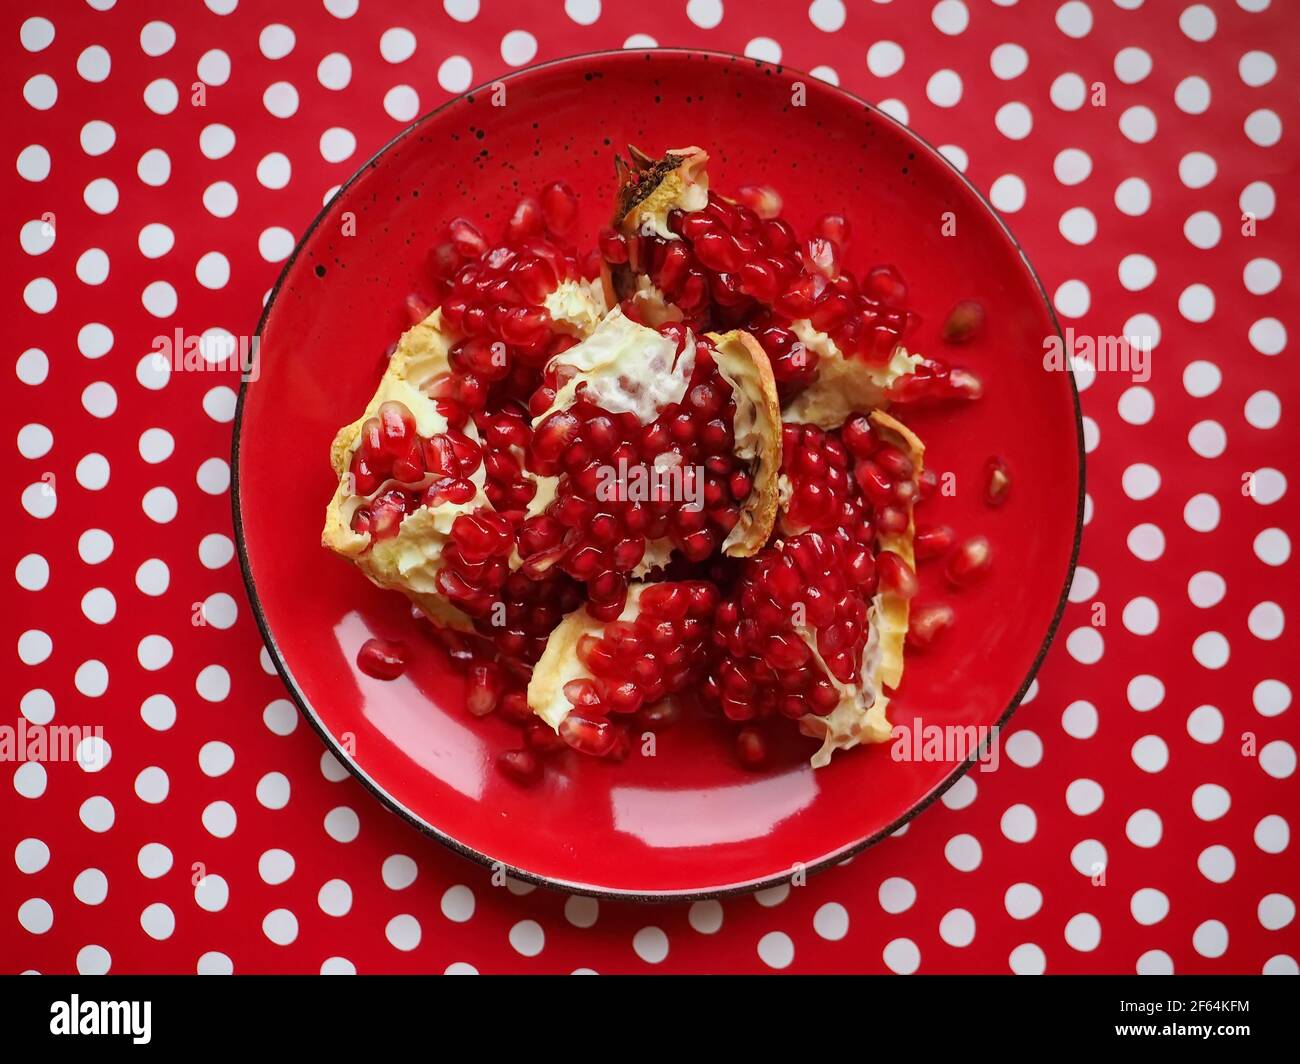 Pomegranate and seeds in a red plate Stock Photo